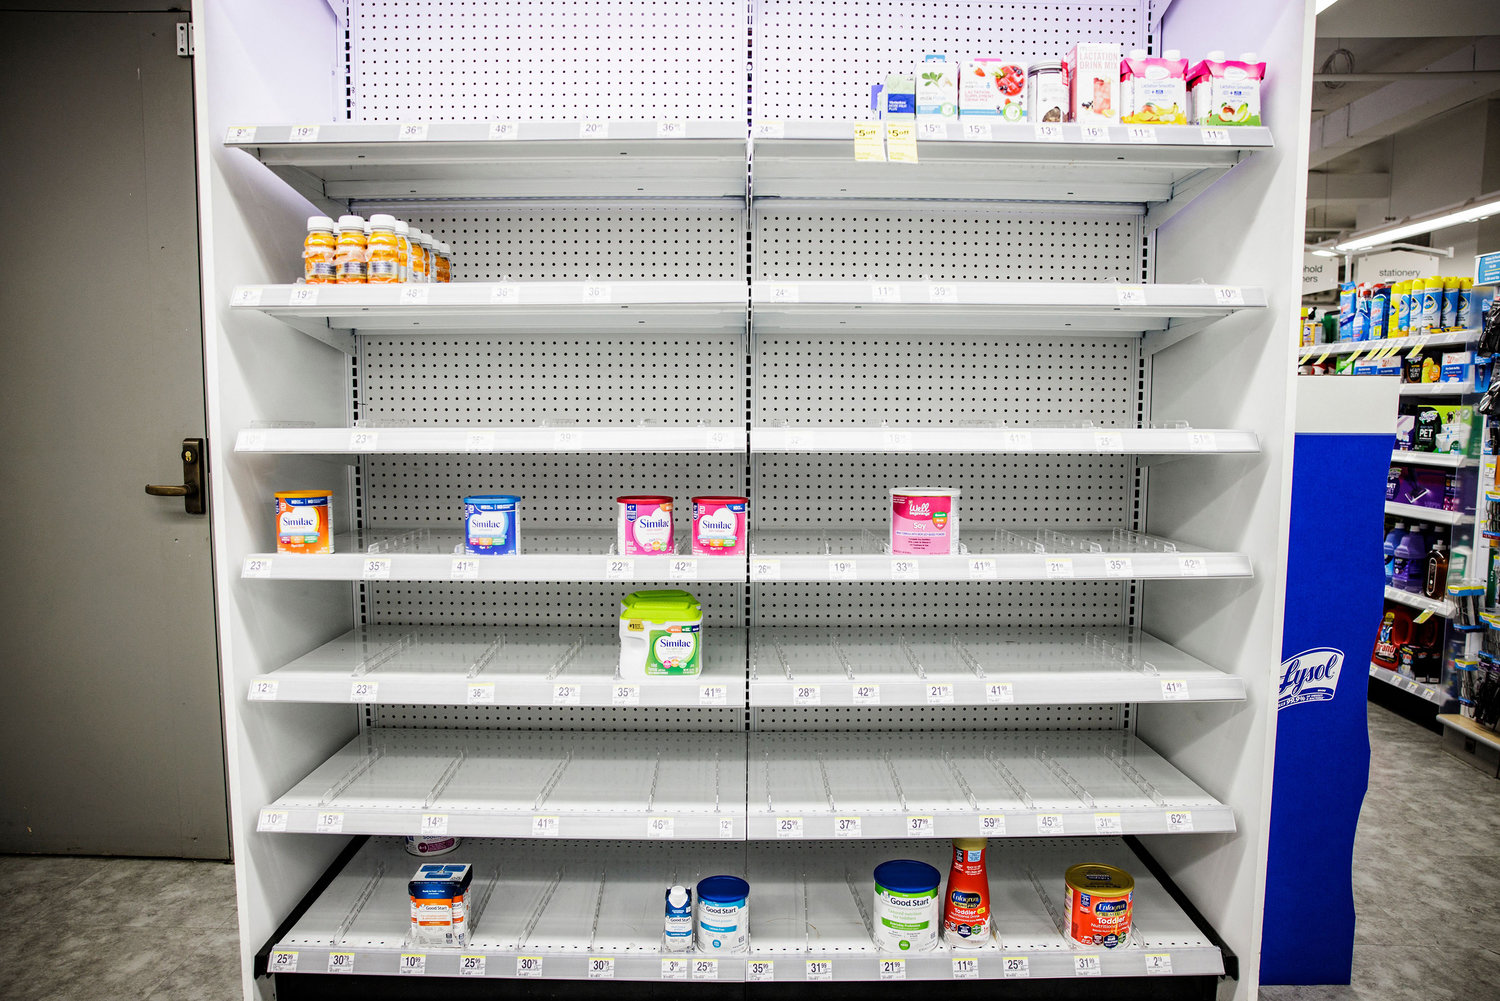 Shelves normally meant for baby formula sit nearly empty at a store in downtown Washington, D.C., on May 22, 2022. (Samuel Corum/AFP/Getty Images/TNS)